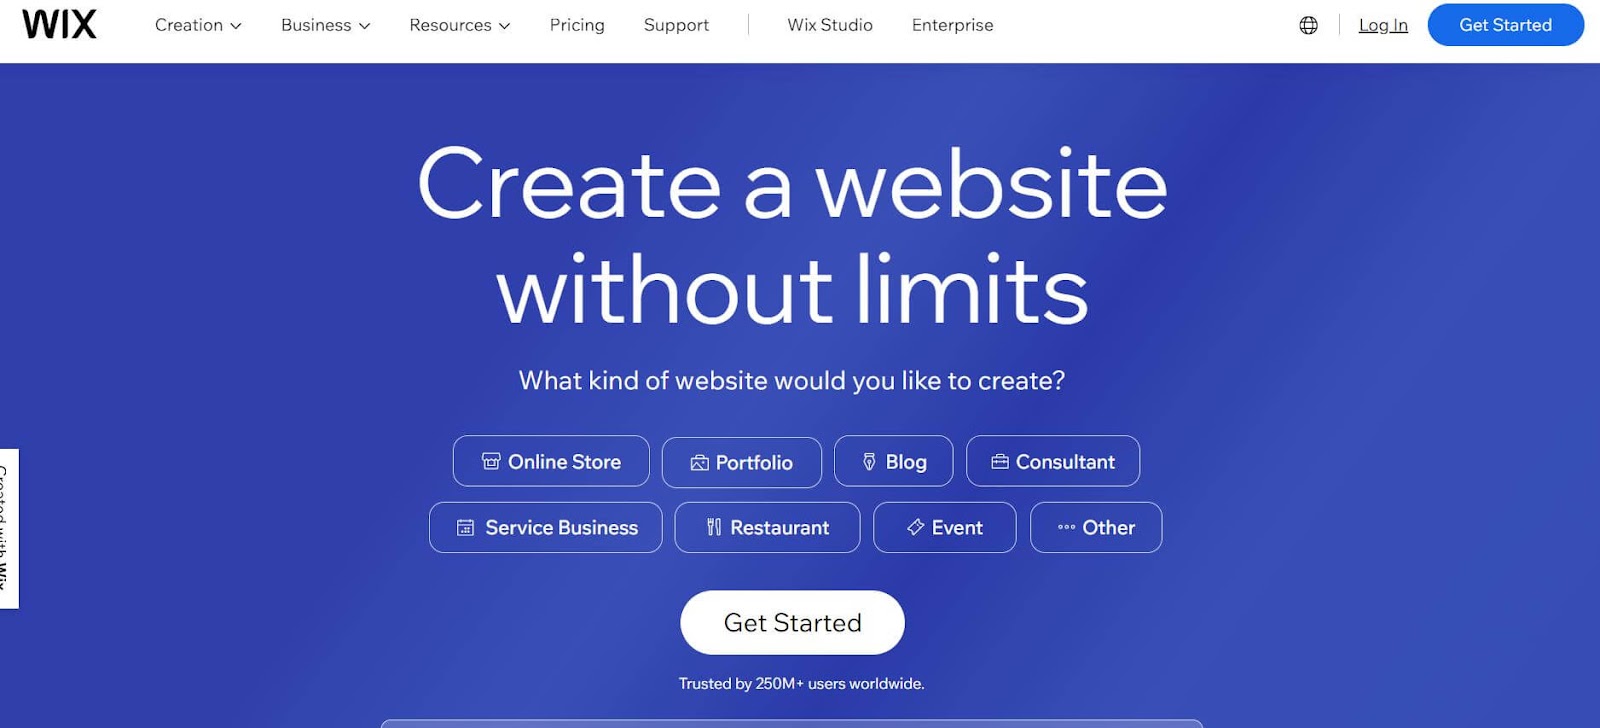 Wix: Shopify Alternative for Small Business